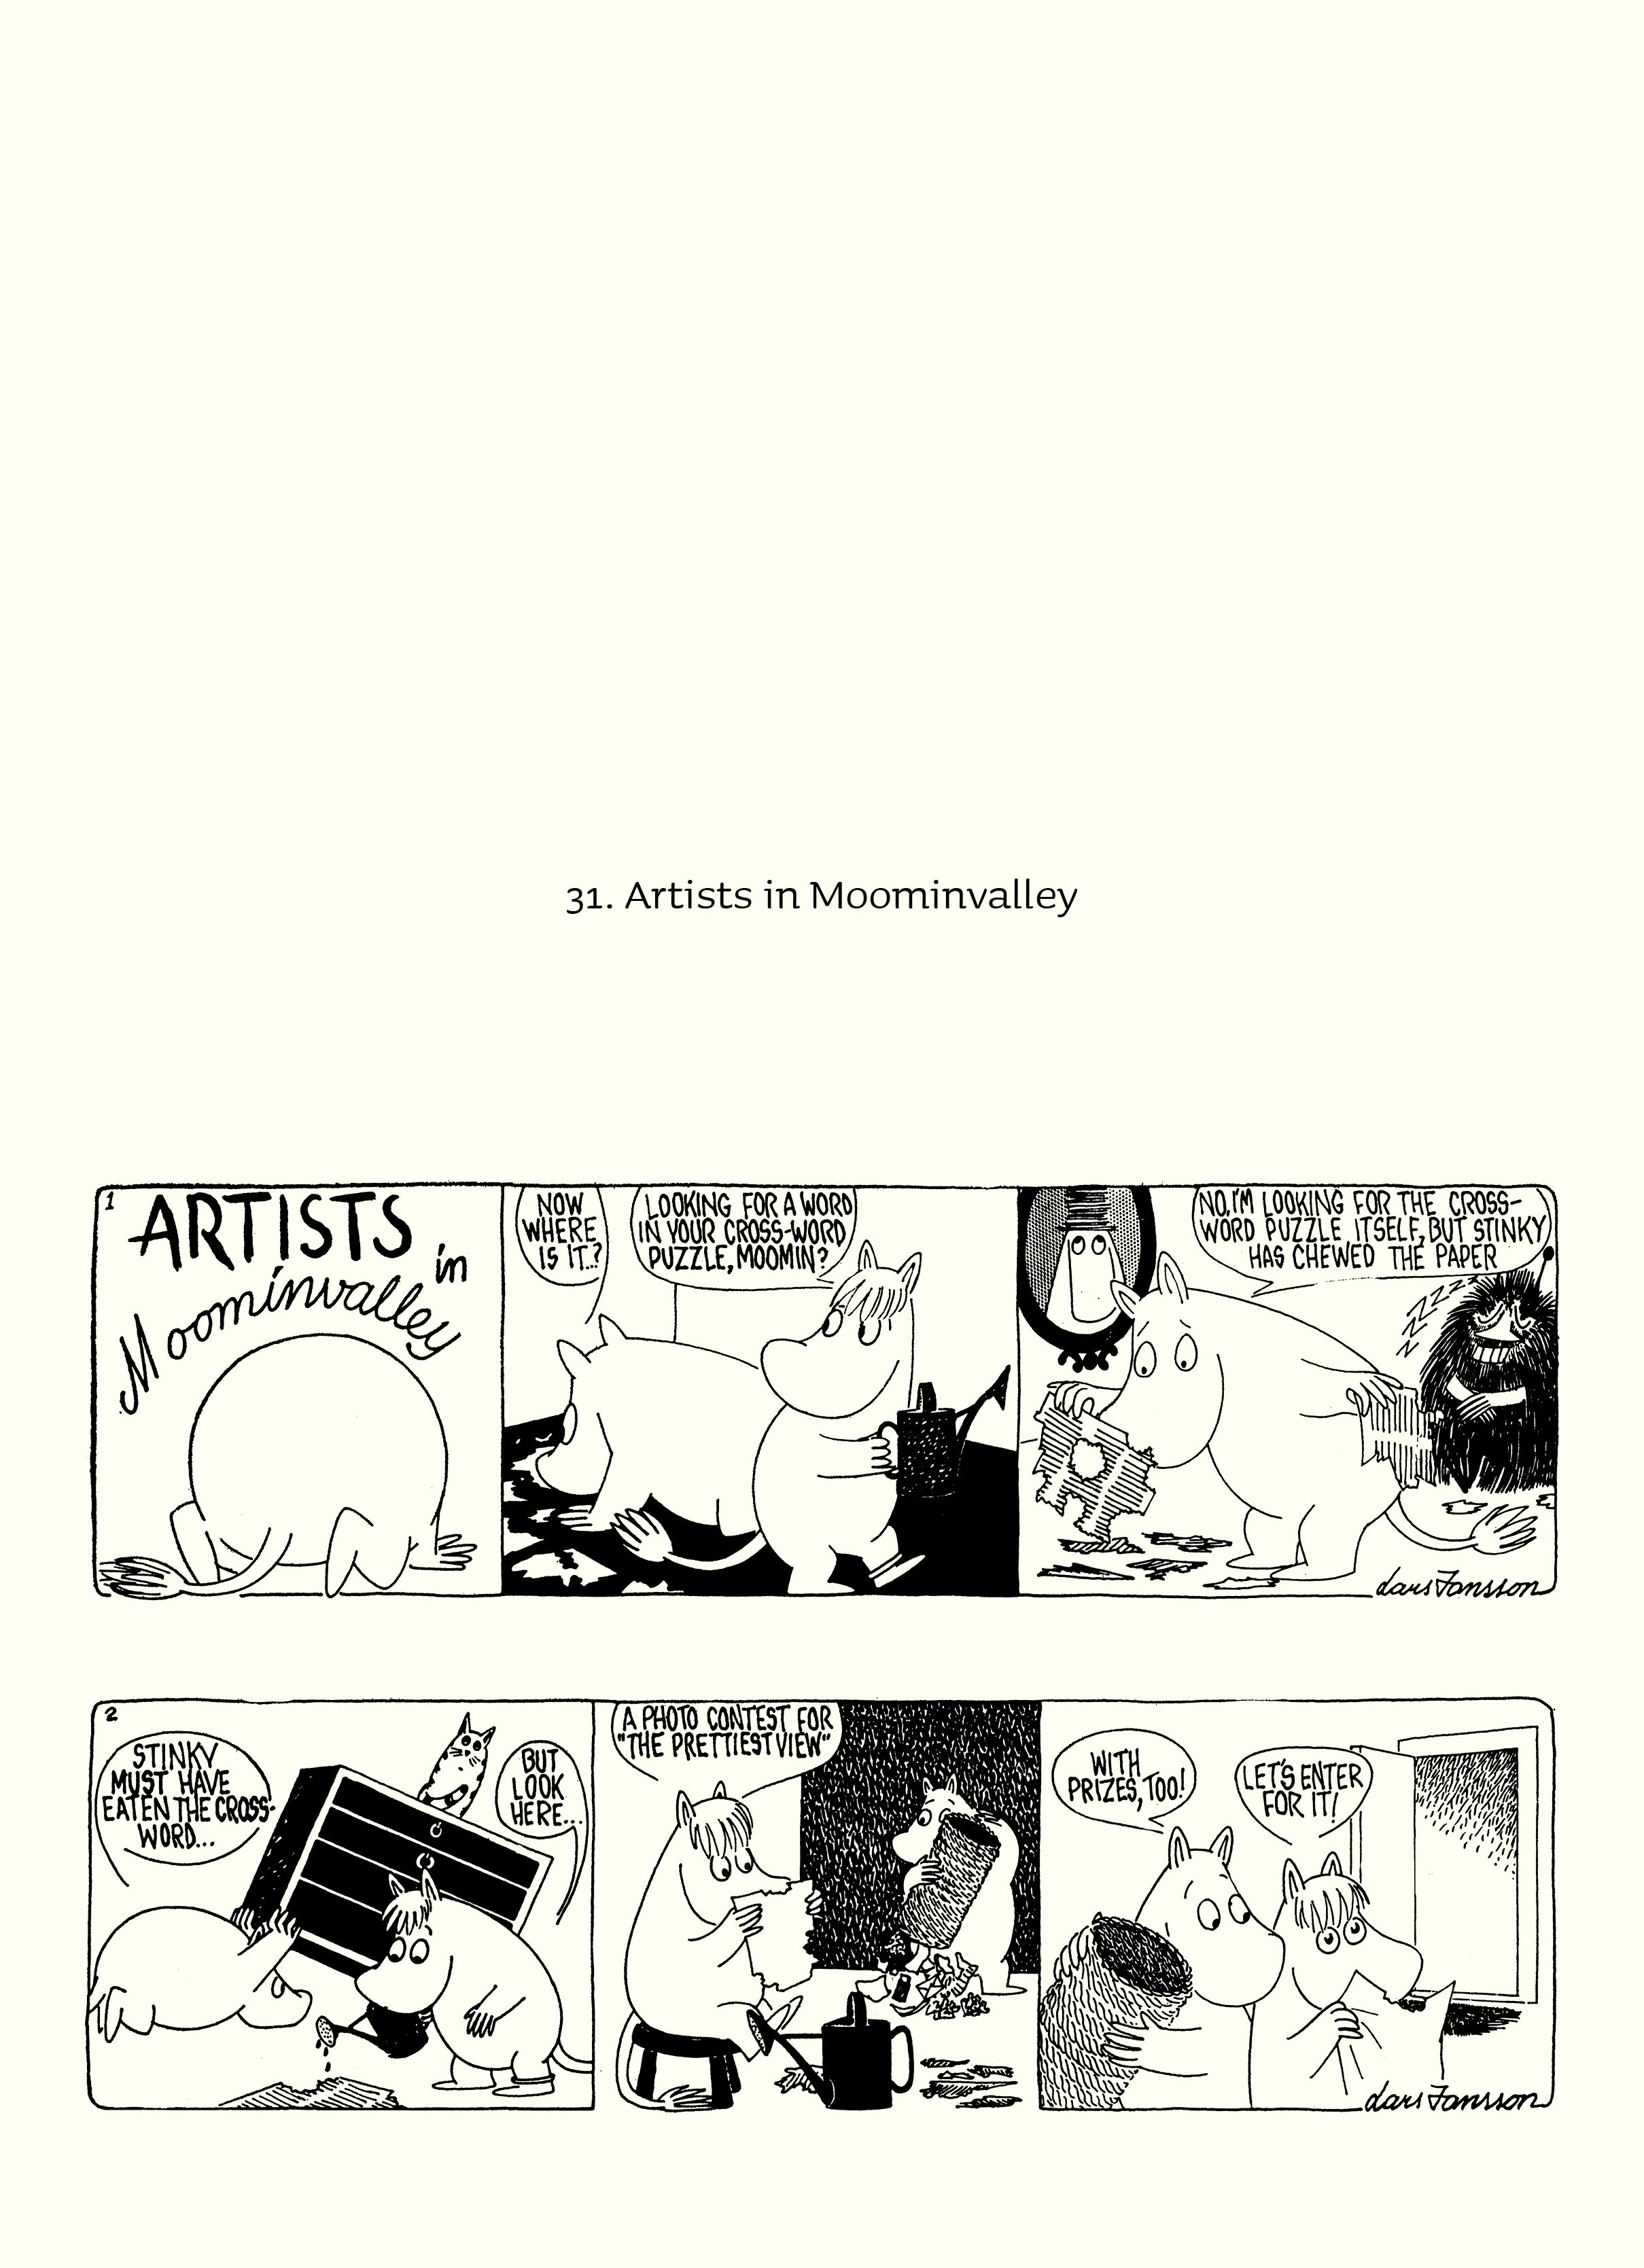 Read online Moomin: The Complete Lars Jansson Comic Strip comic -  Issue # TPB 8 - 27